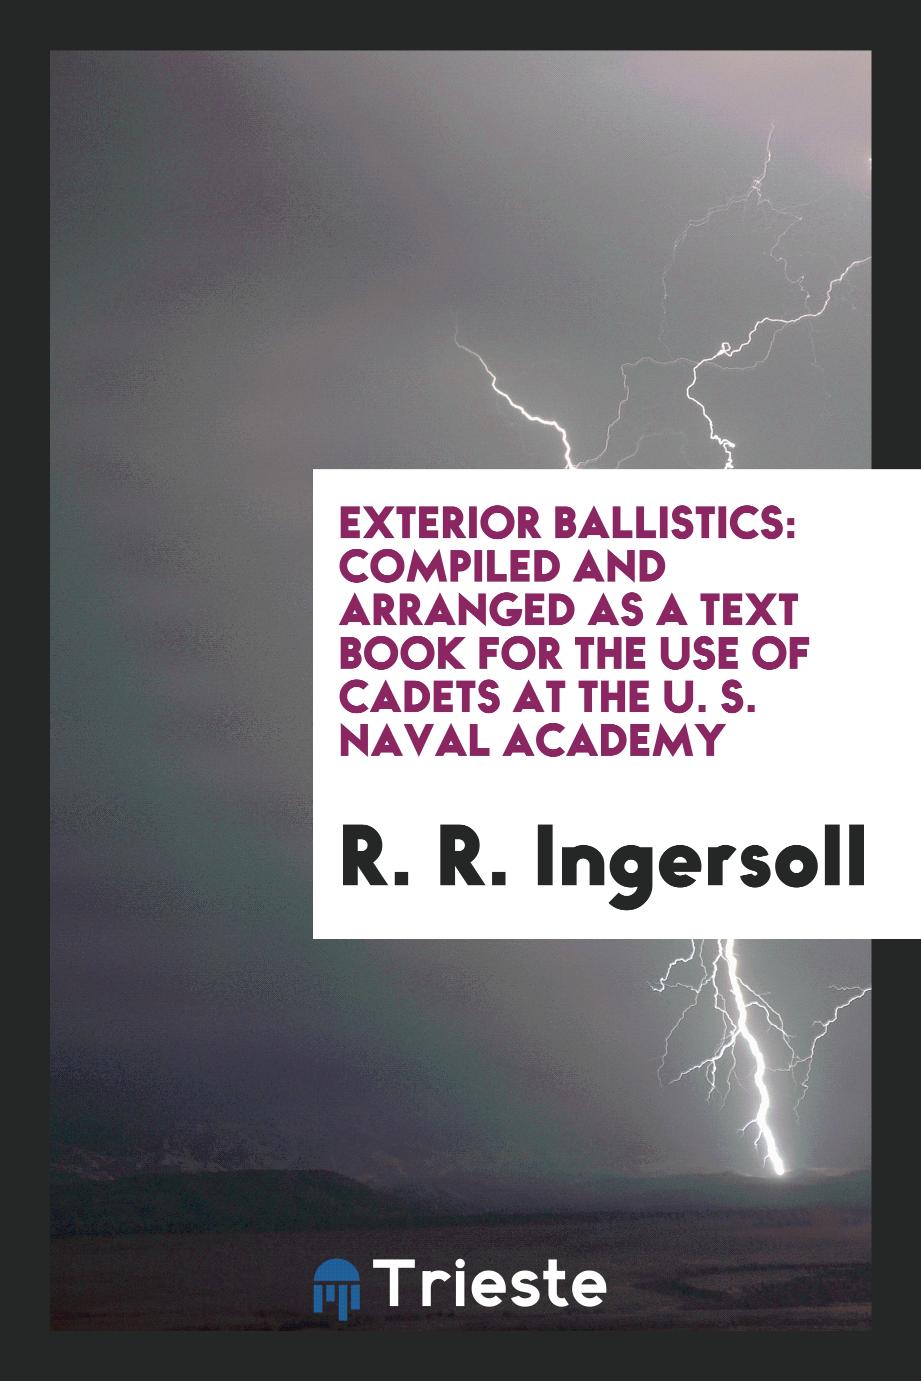 Exterior Ballistics: Compiled and Arranged as a Text Book for the Use of cadets at the U. S. naval academy